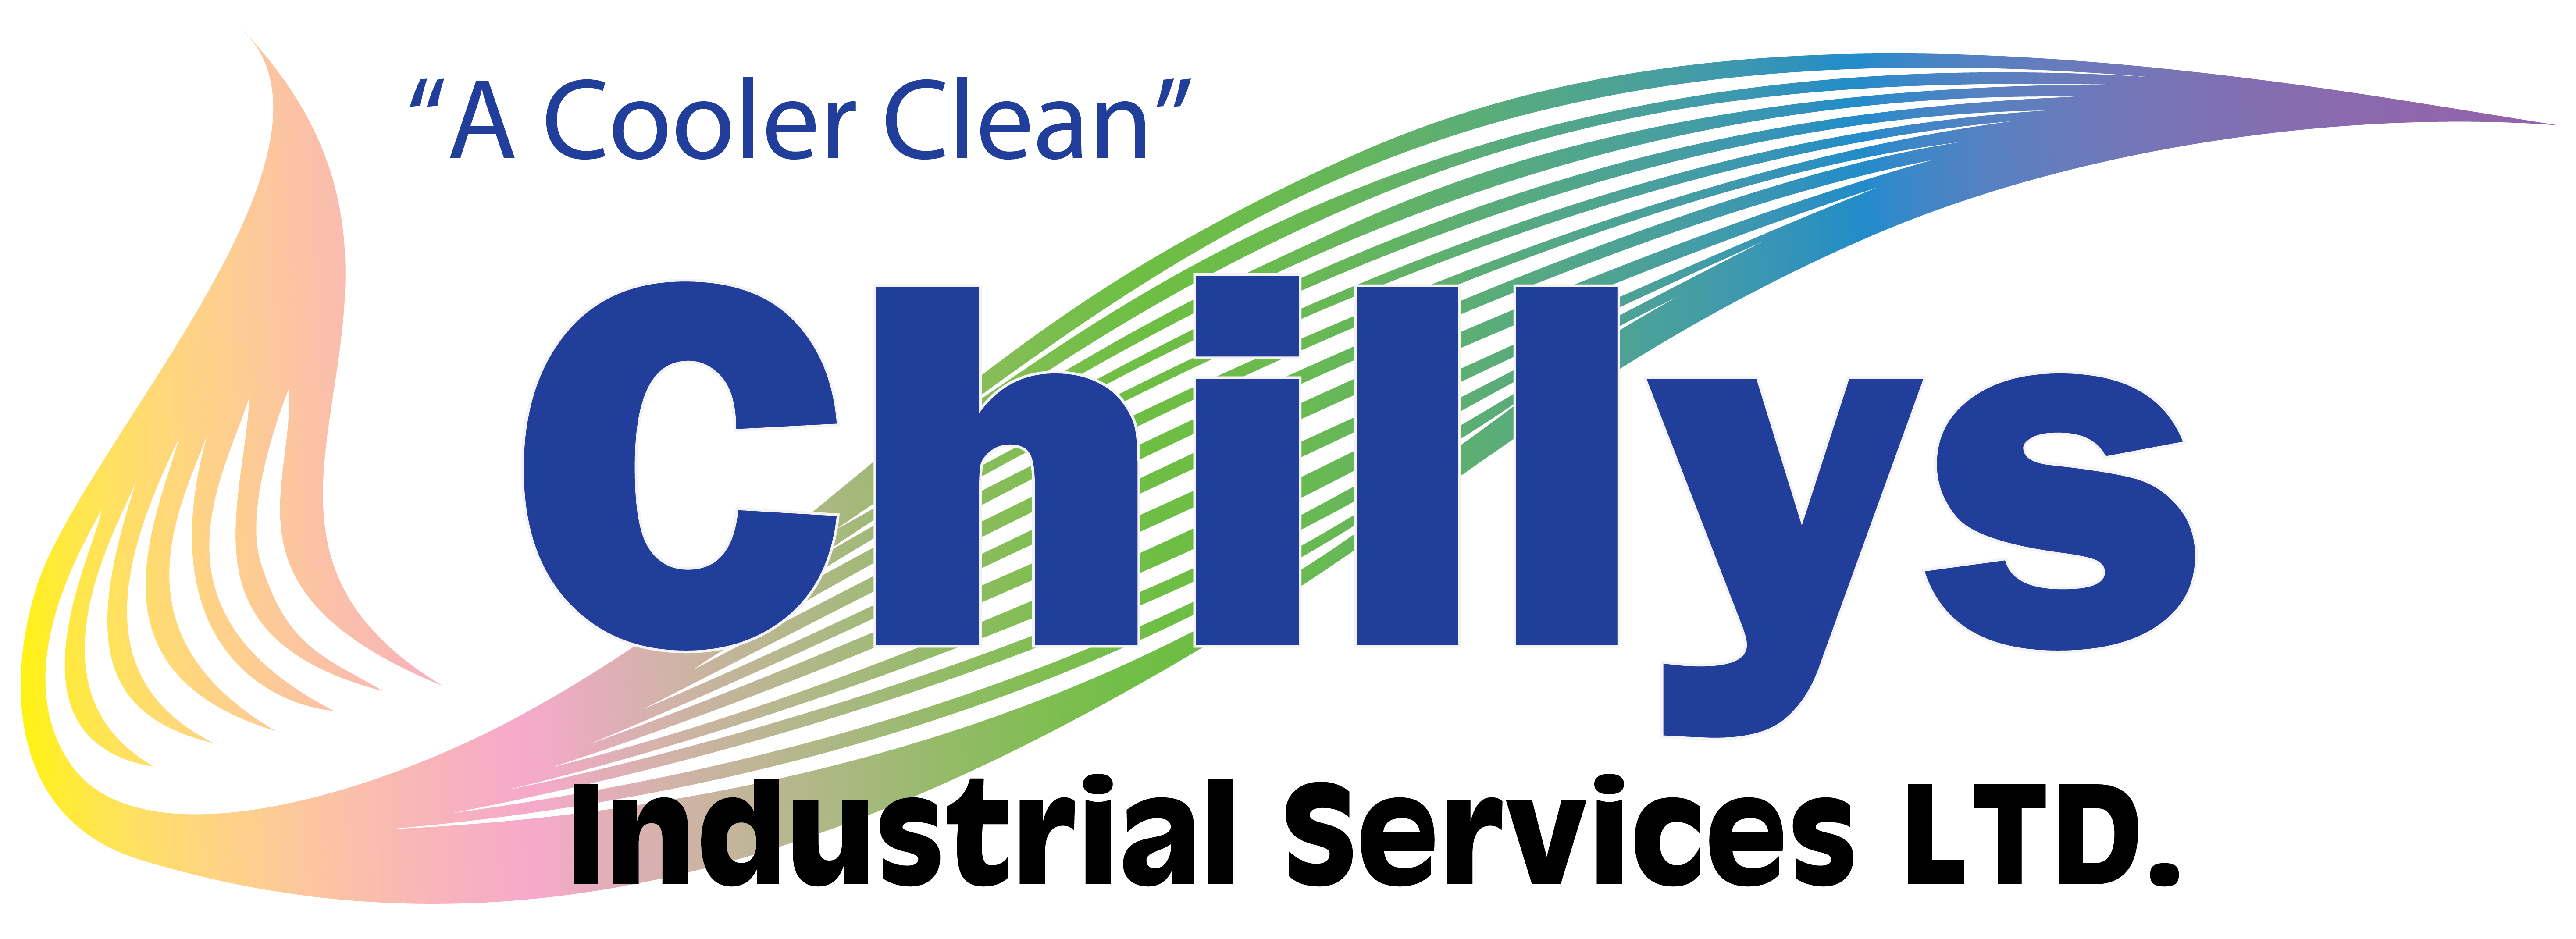 Chillys.ca